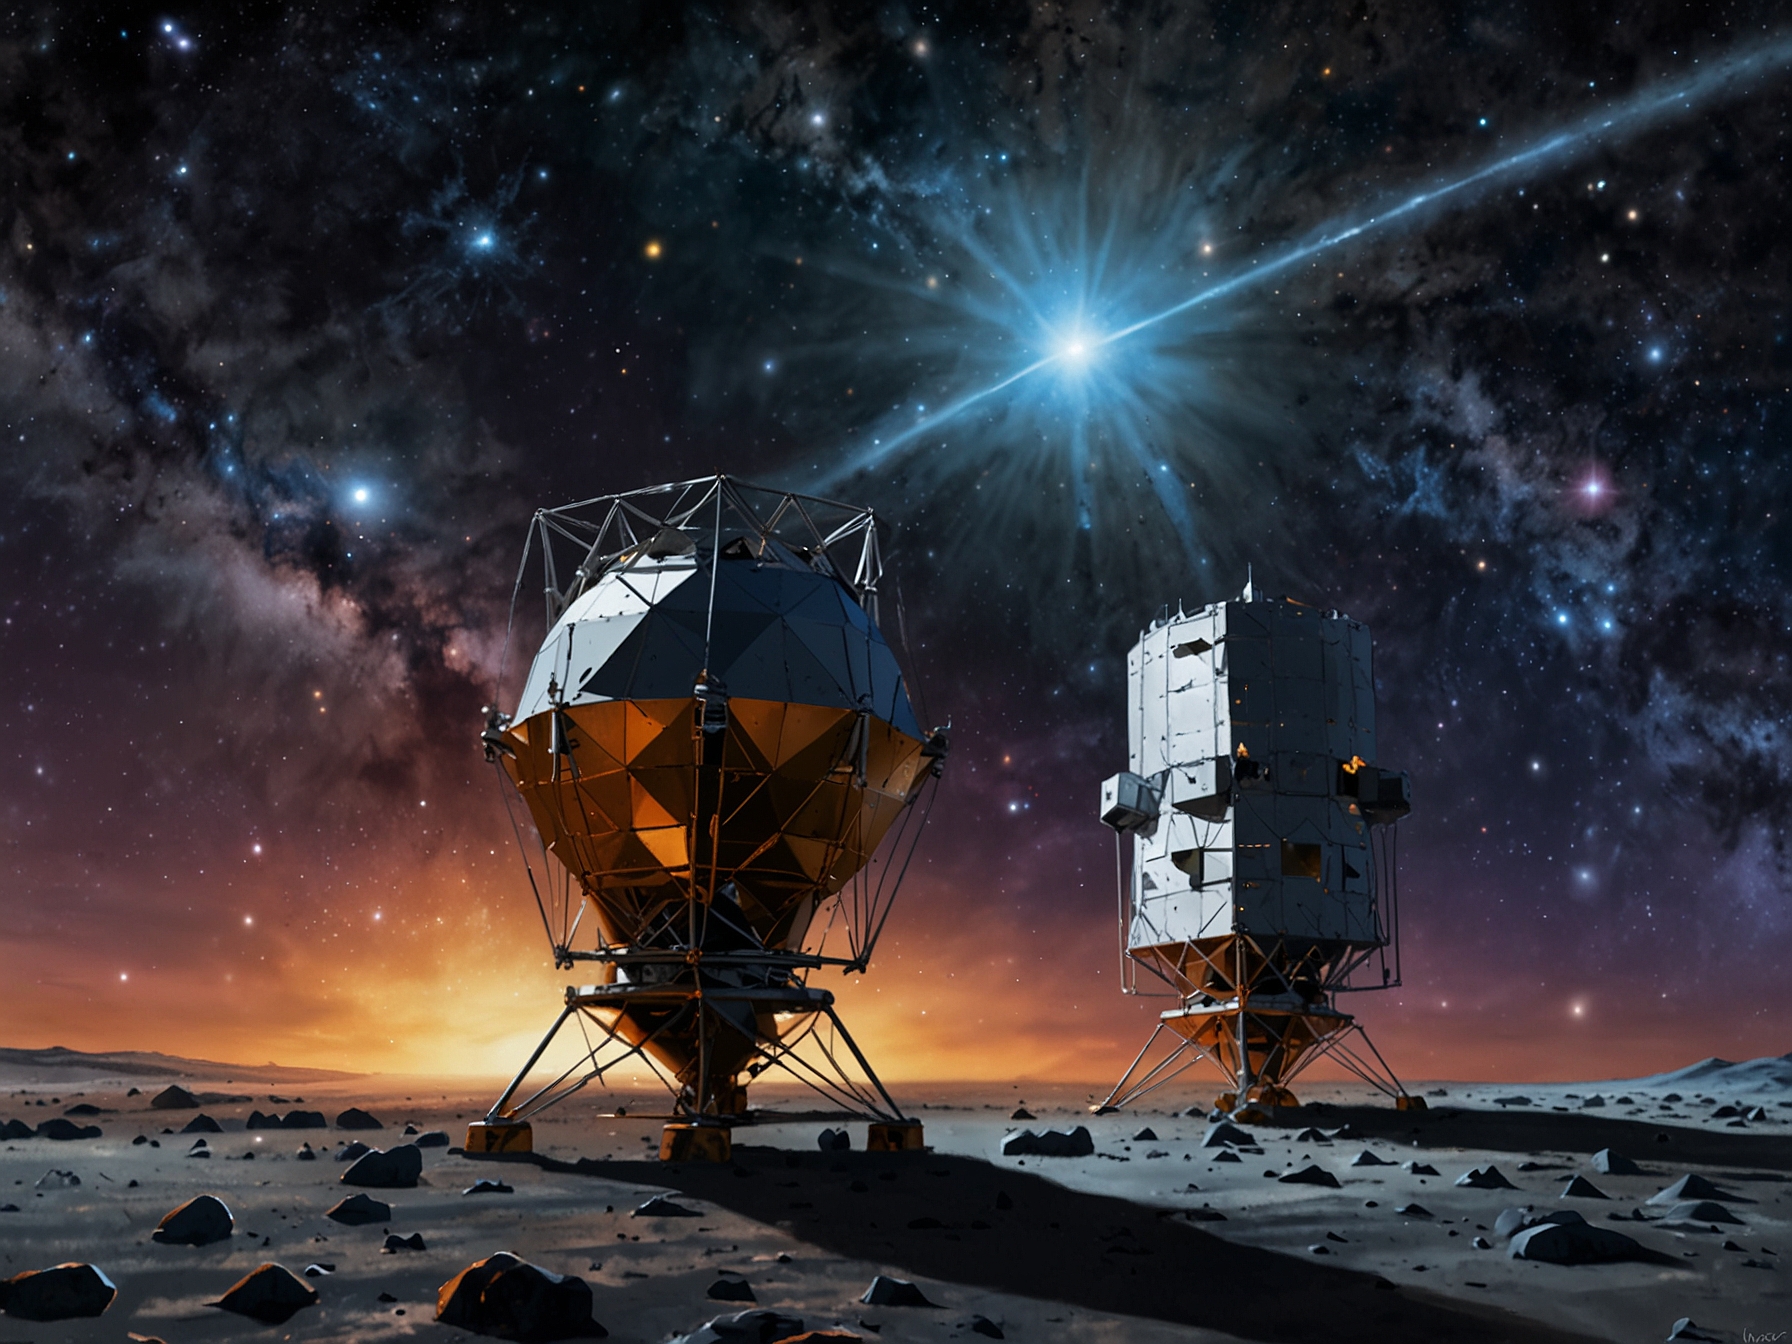 An artist's depiction of the XMM-Newton and Chandra spacecrafts observing neutron stars, highlighting the collaborative efforts in unraveling cosmic mysteries.